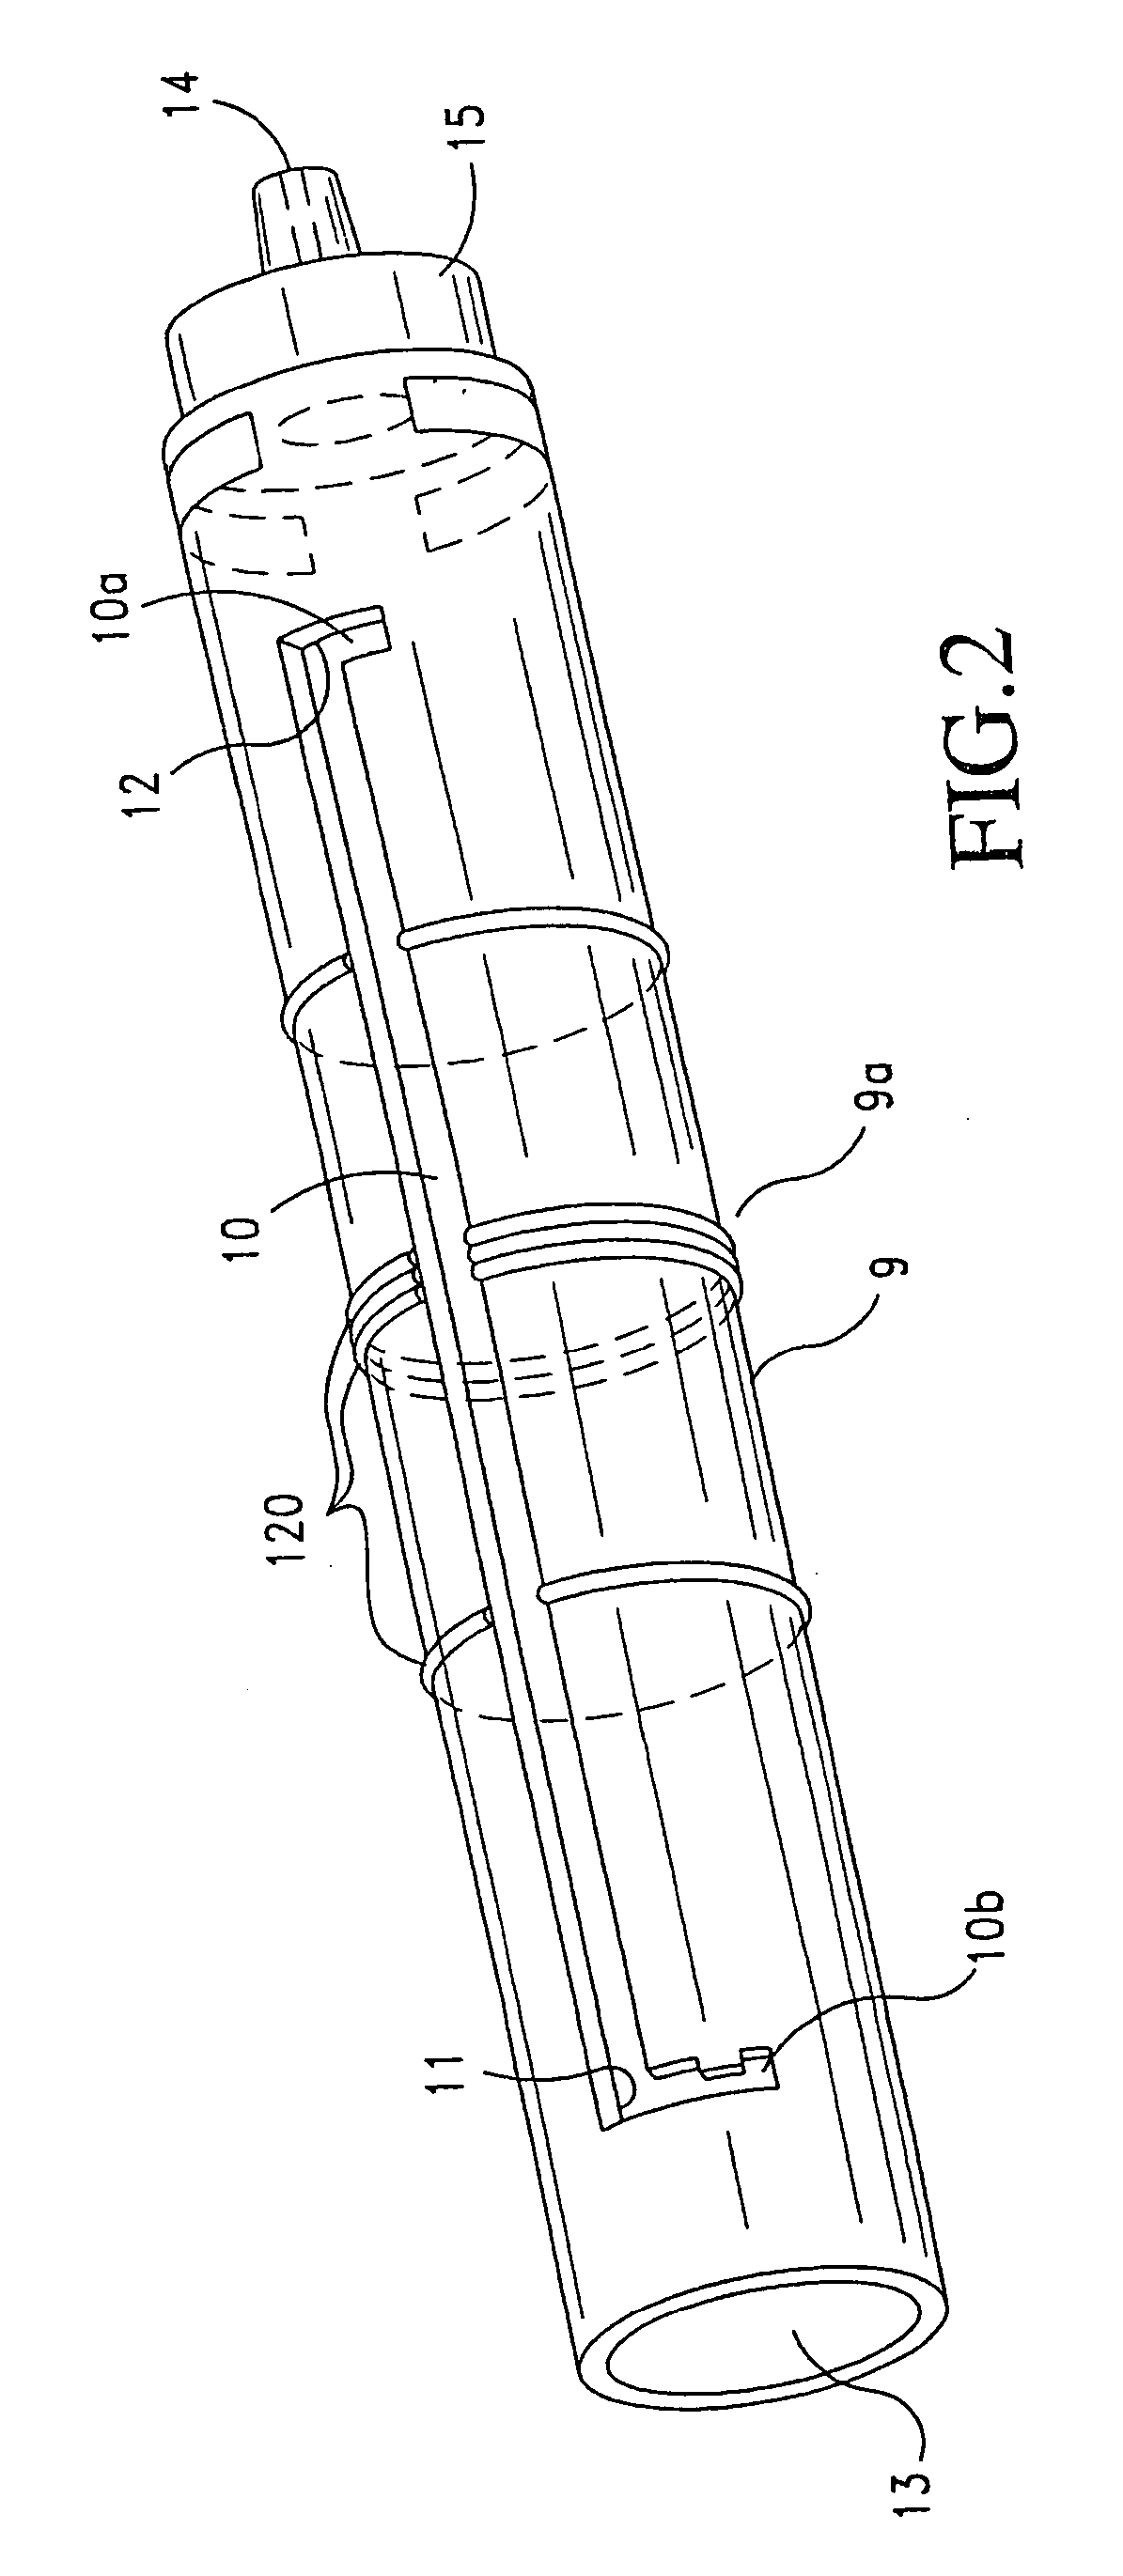 Hypodermic syringe needle assembly and method of making the same